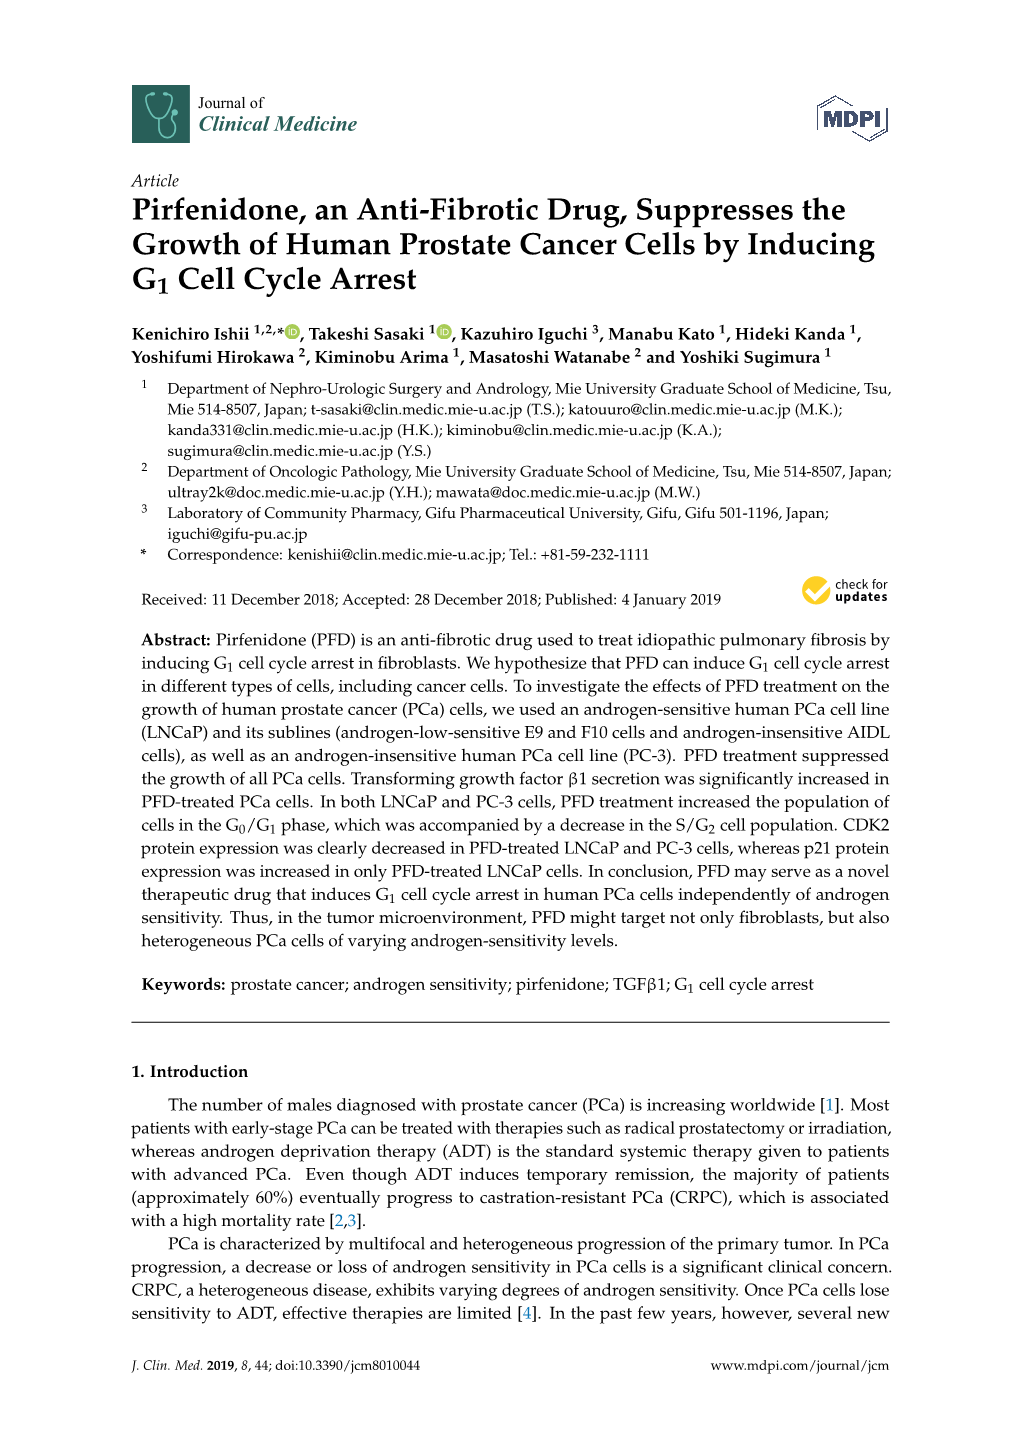 Pirfenidone, an Anti-Fibrotic Drug, Suppresses the Growth of Human Prostate Cancer Cells by Inducing G1 Cell Cycle Arrest